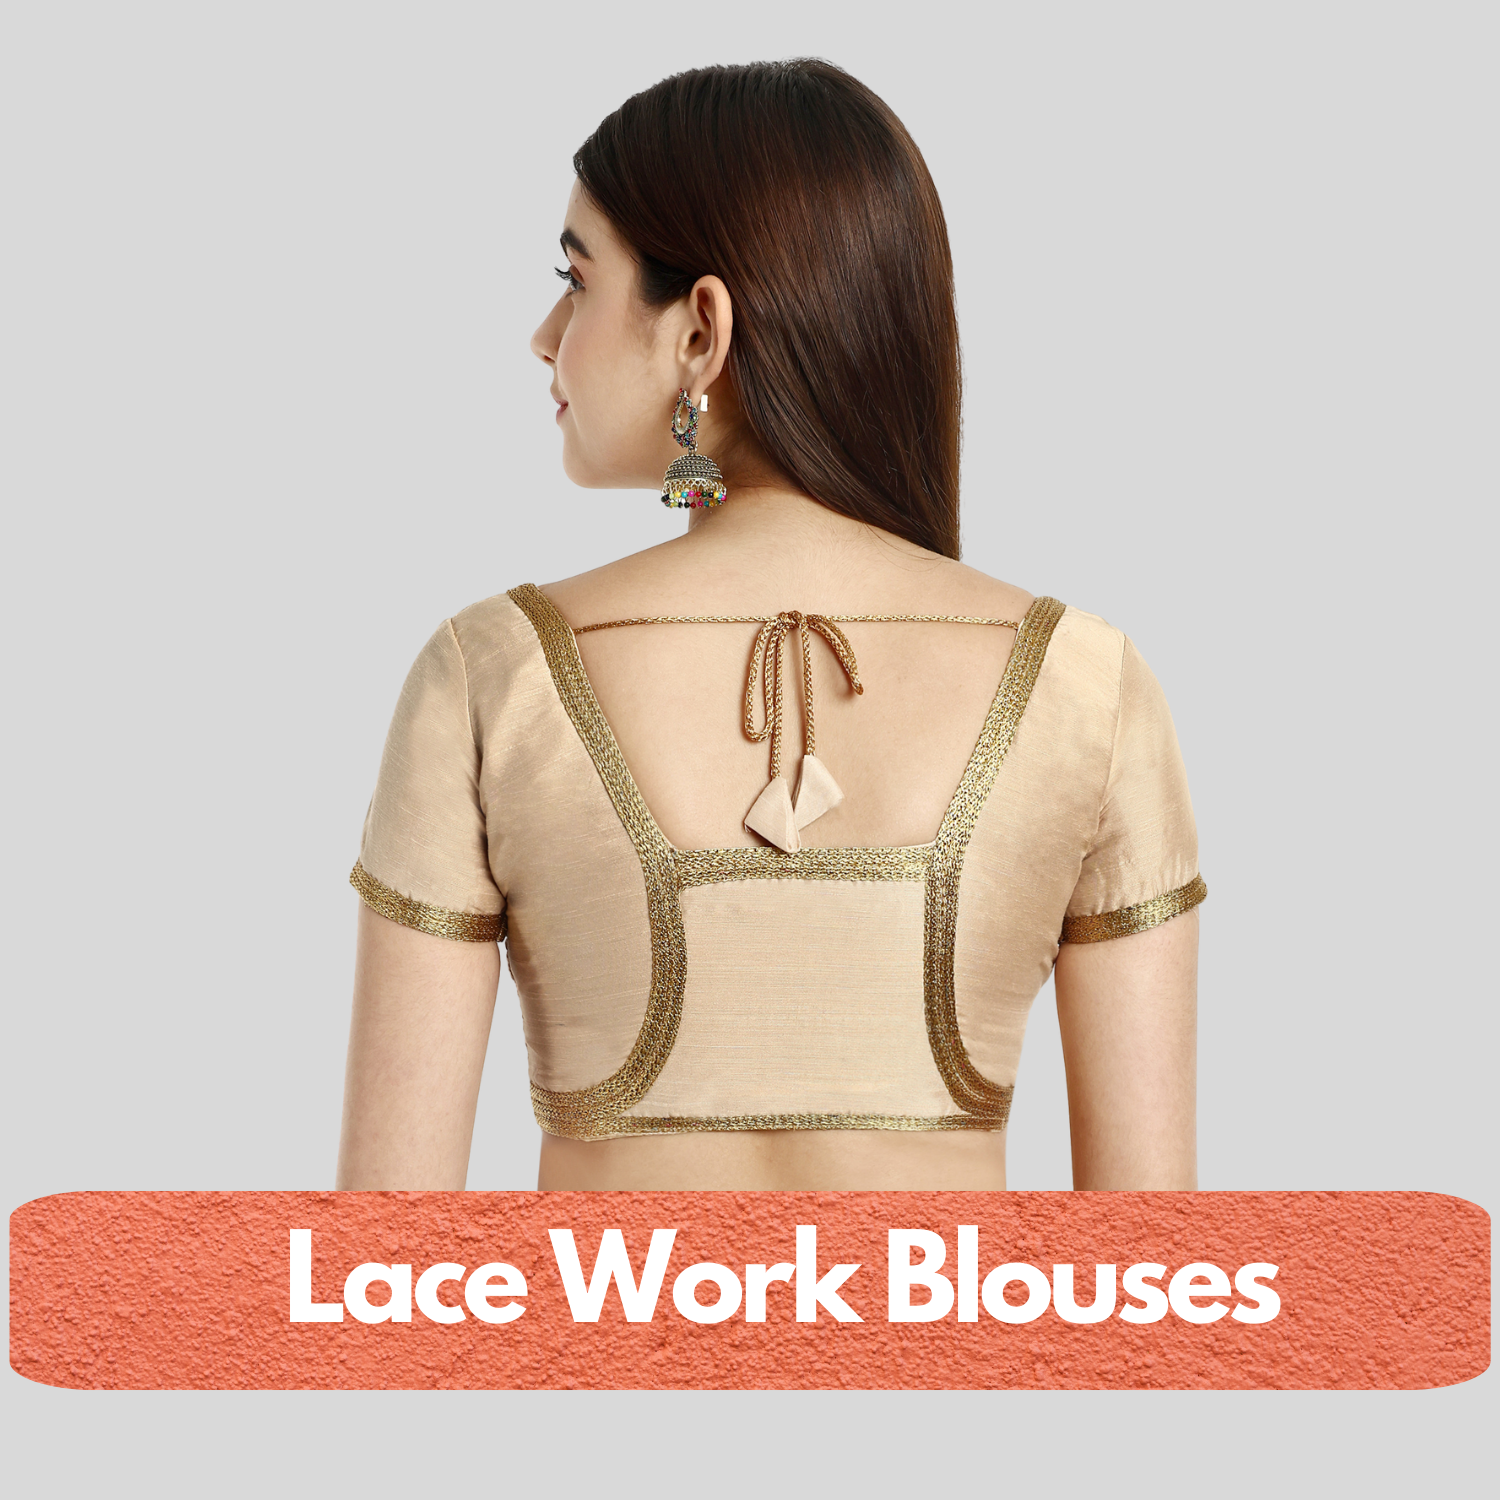 Lace work grand blouses